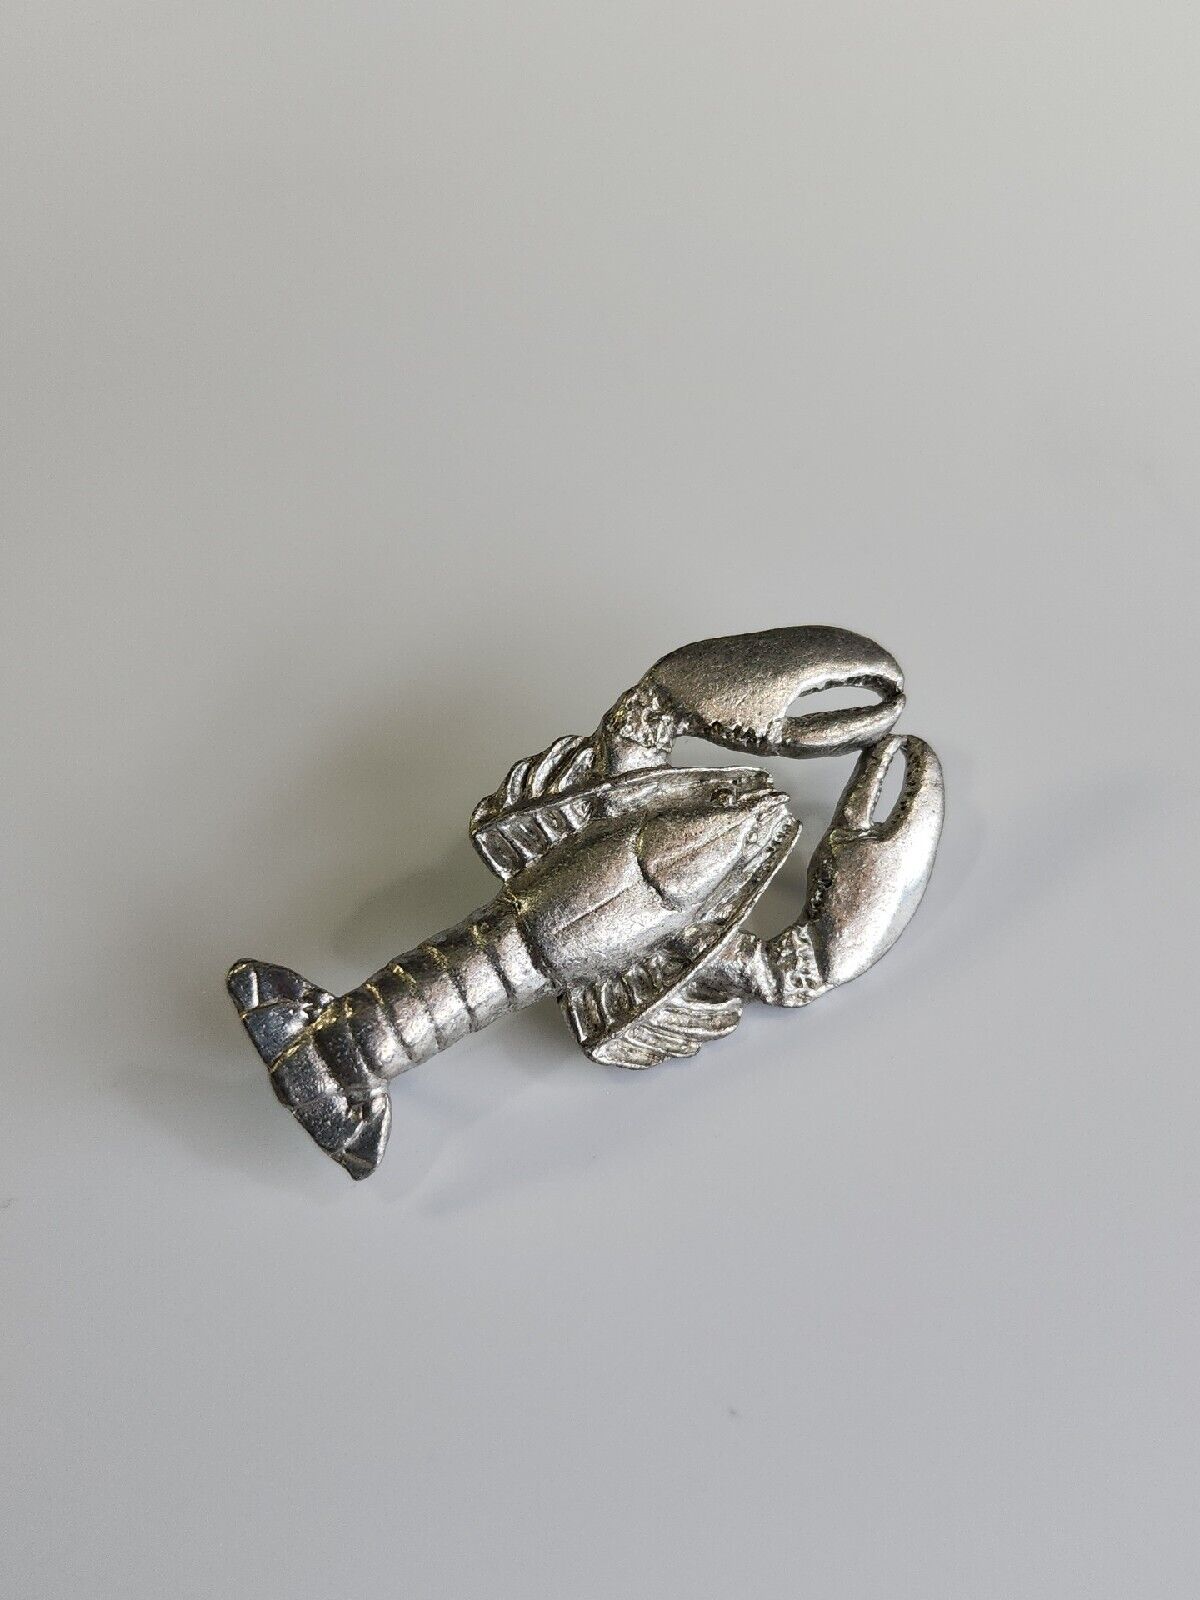 GG Harris Fine Pewter Lobster Lapel Pin 1995 Intricate Details Signed 